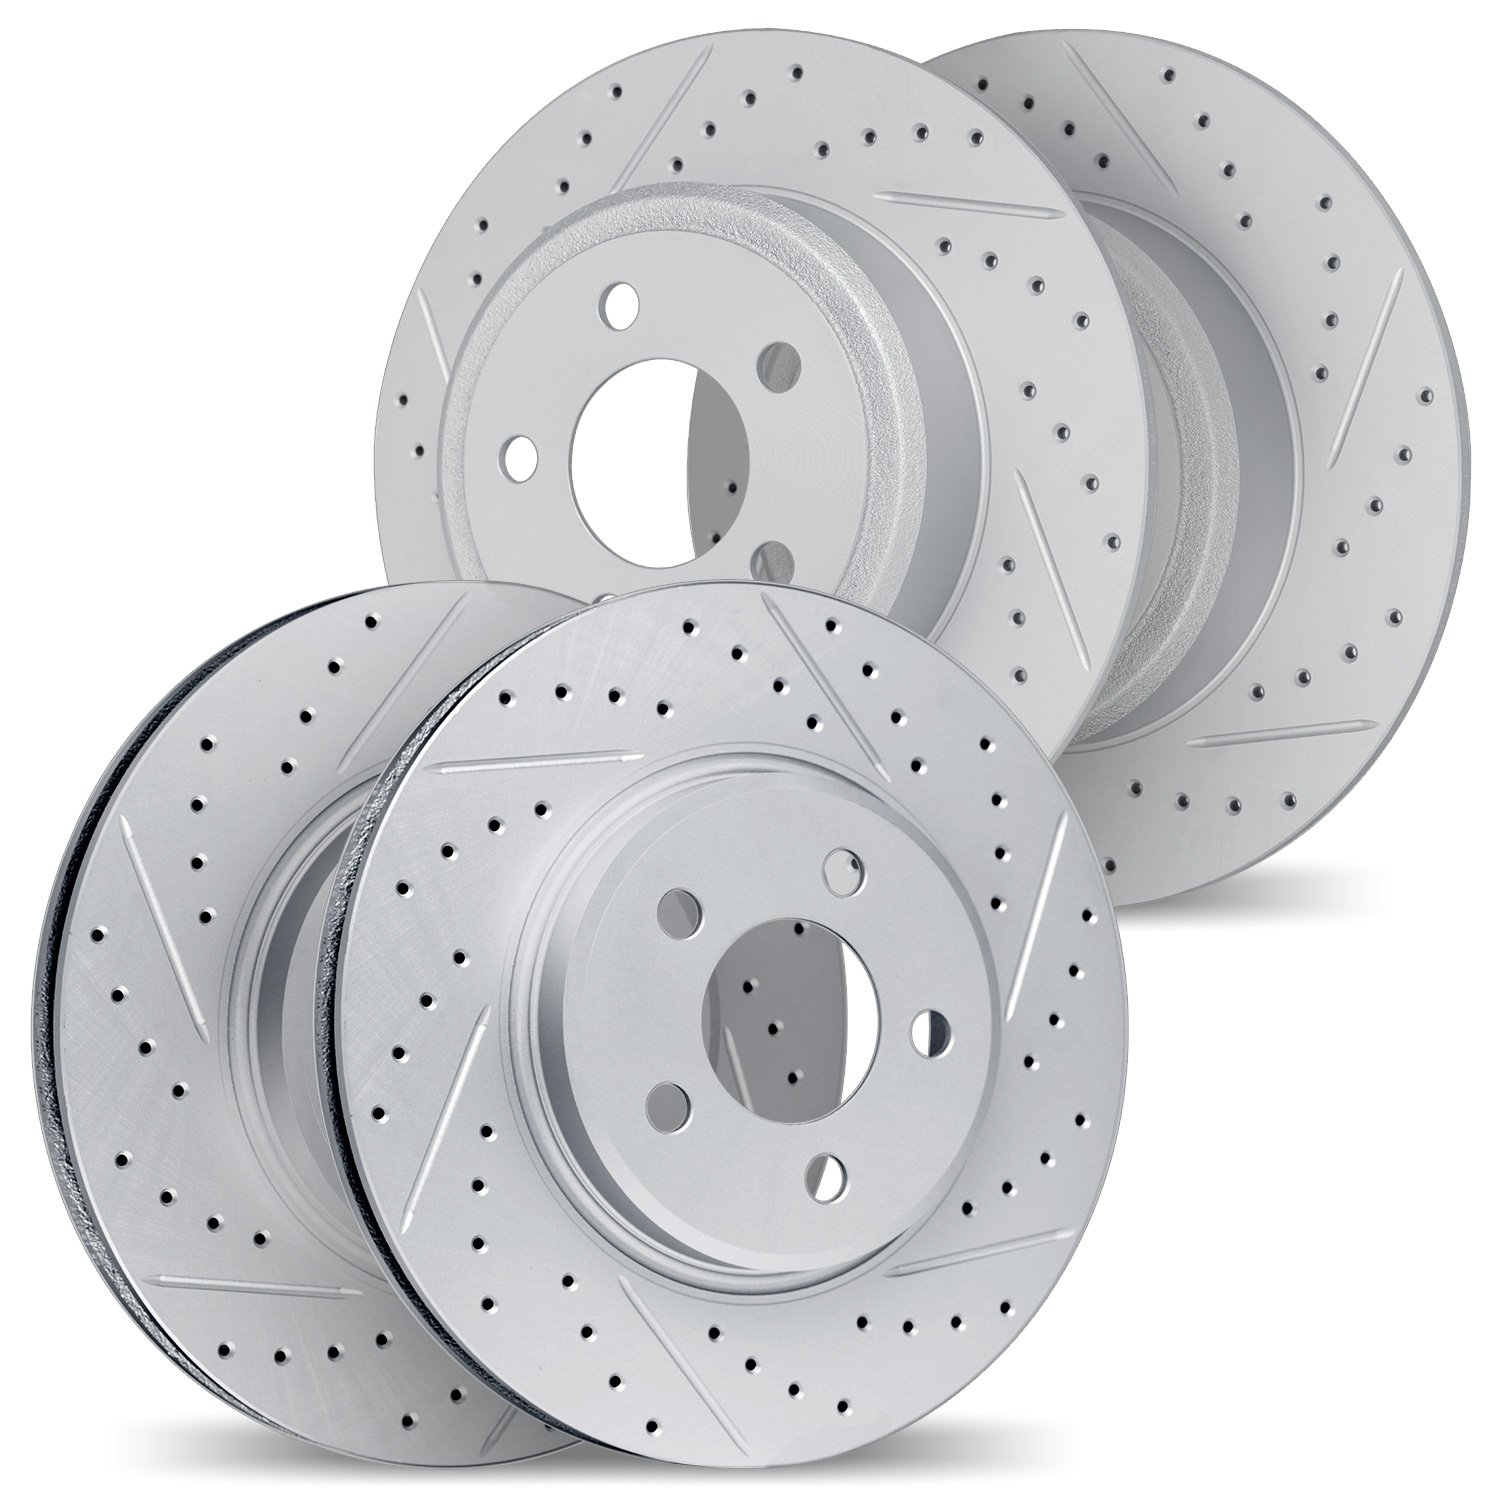 2004-03049 Geoperformance Drilled/Slotted Brake Rotors, 2005-2010 Kia/Hyundai/Genesis, Position: Front and Rear